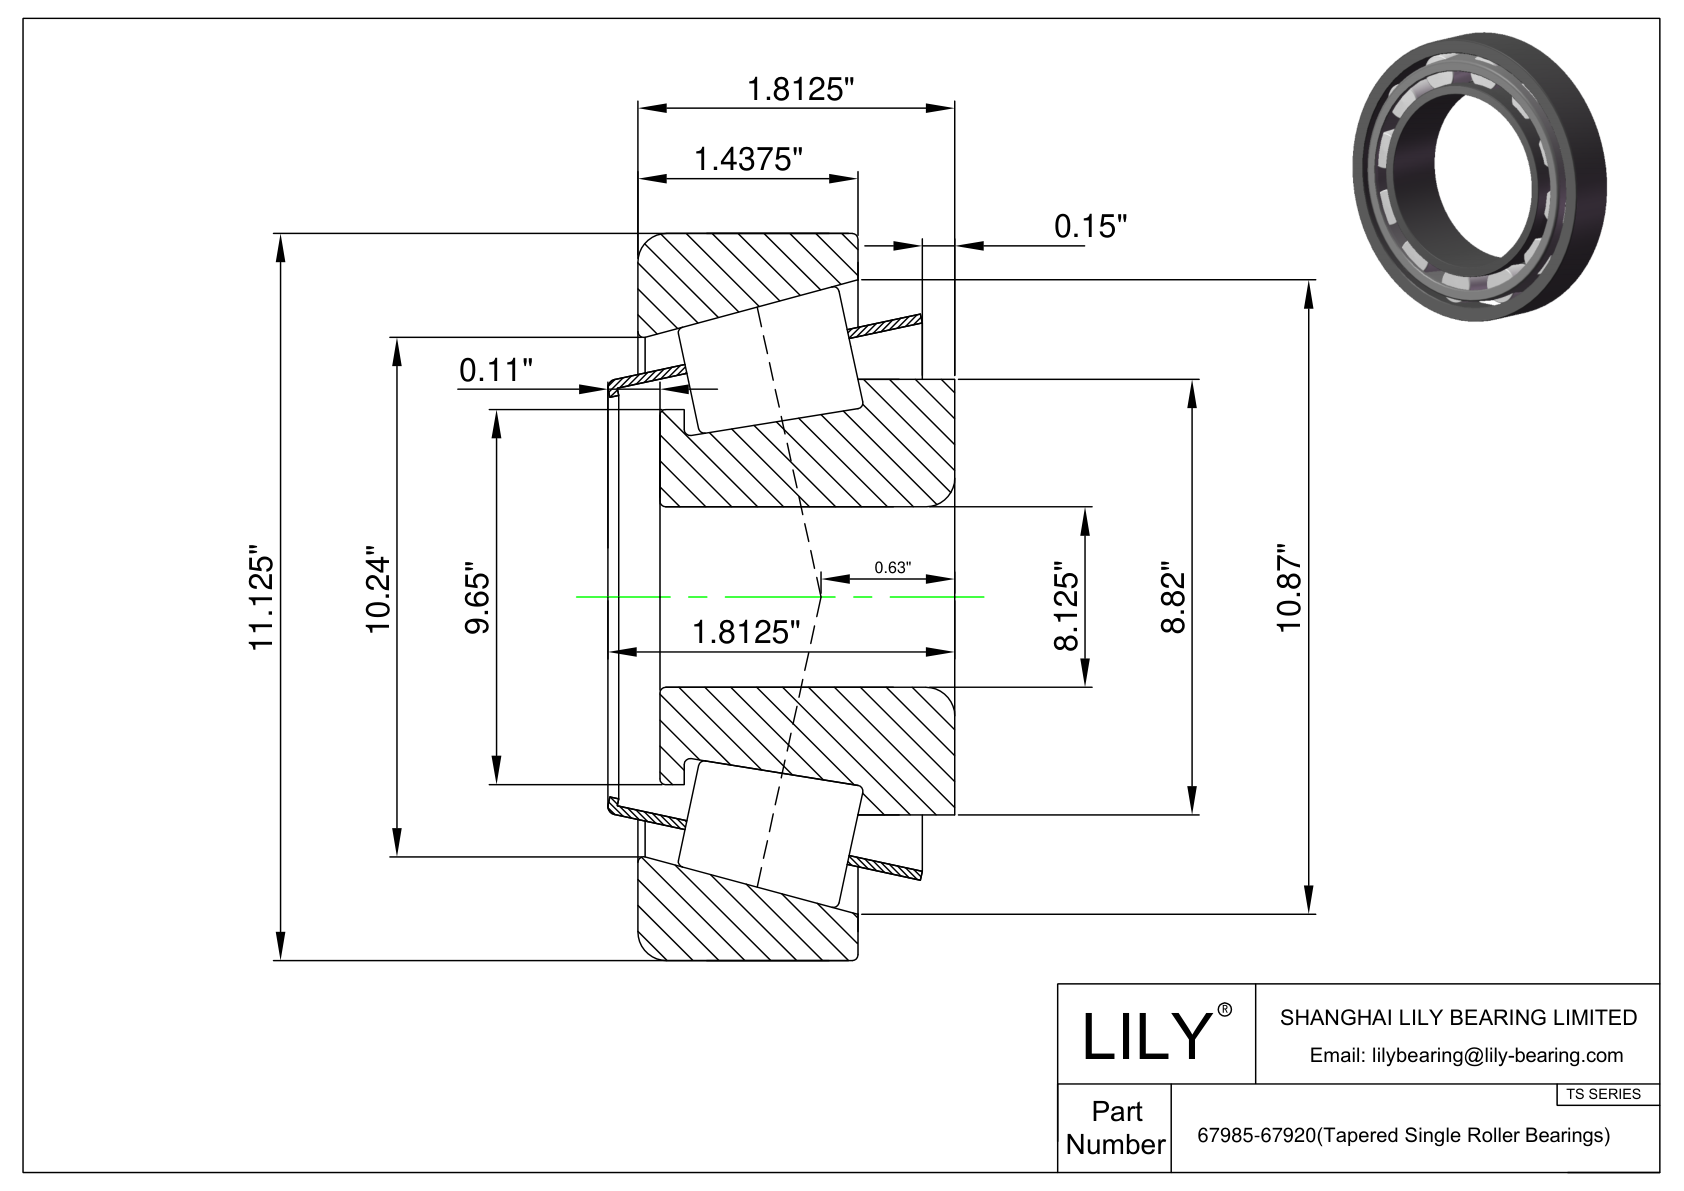 67985-67920 TS (Tapered Single Roller Bearings) (Imperial) cad drawing